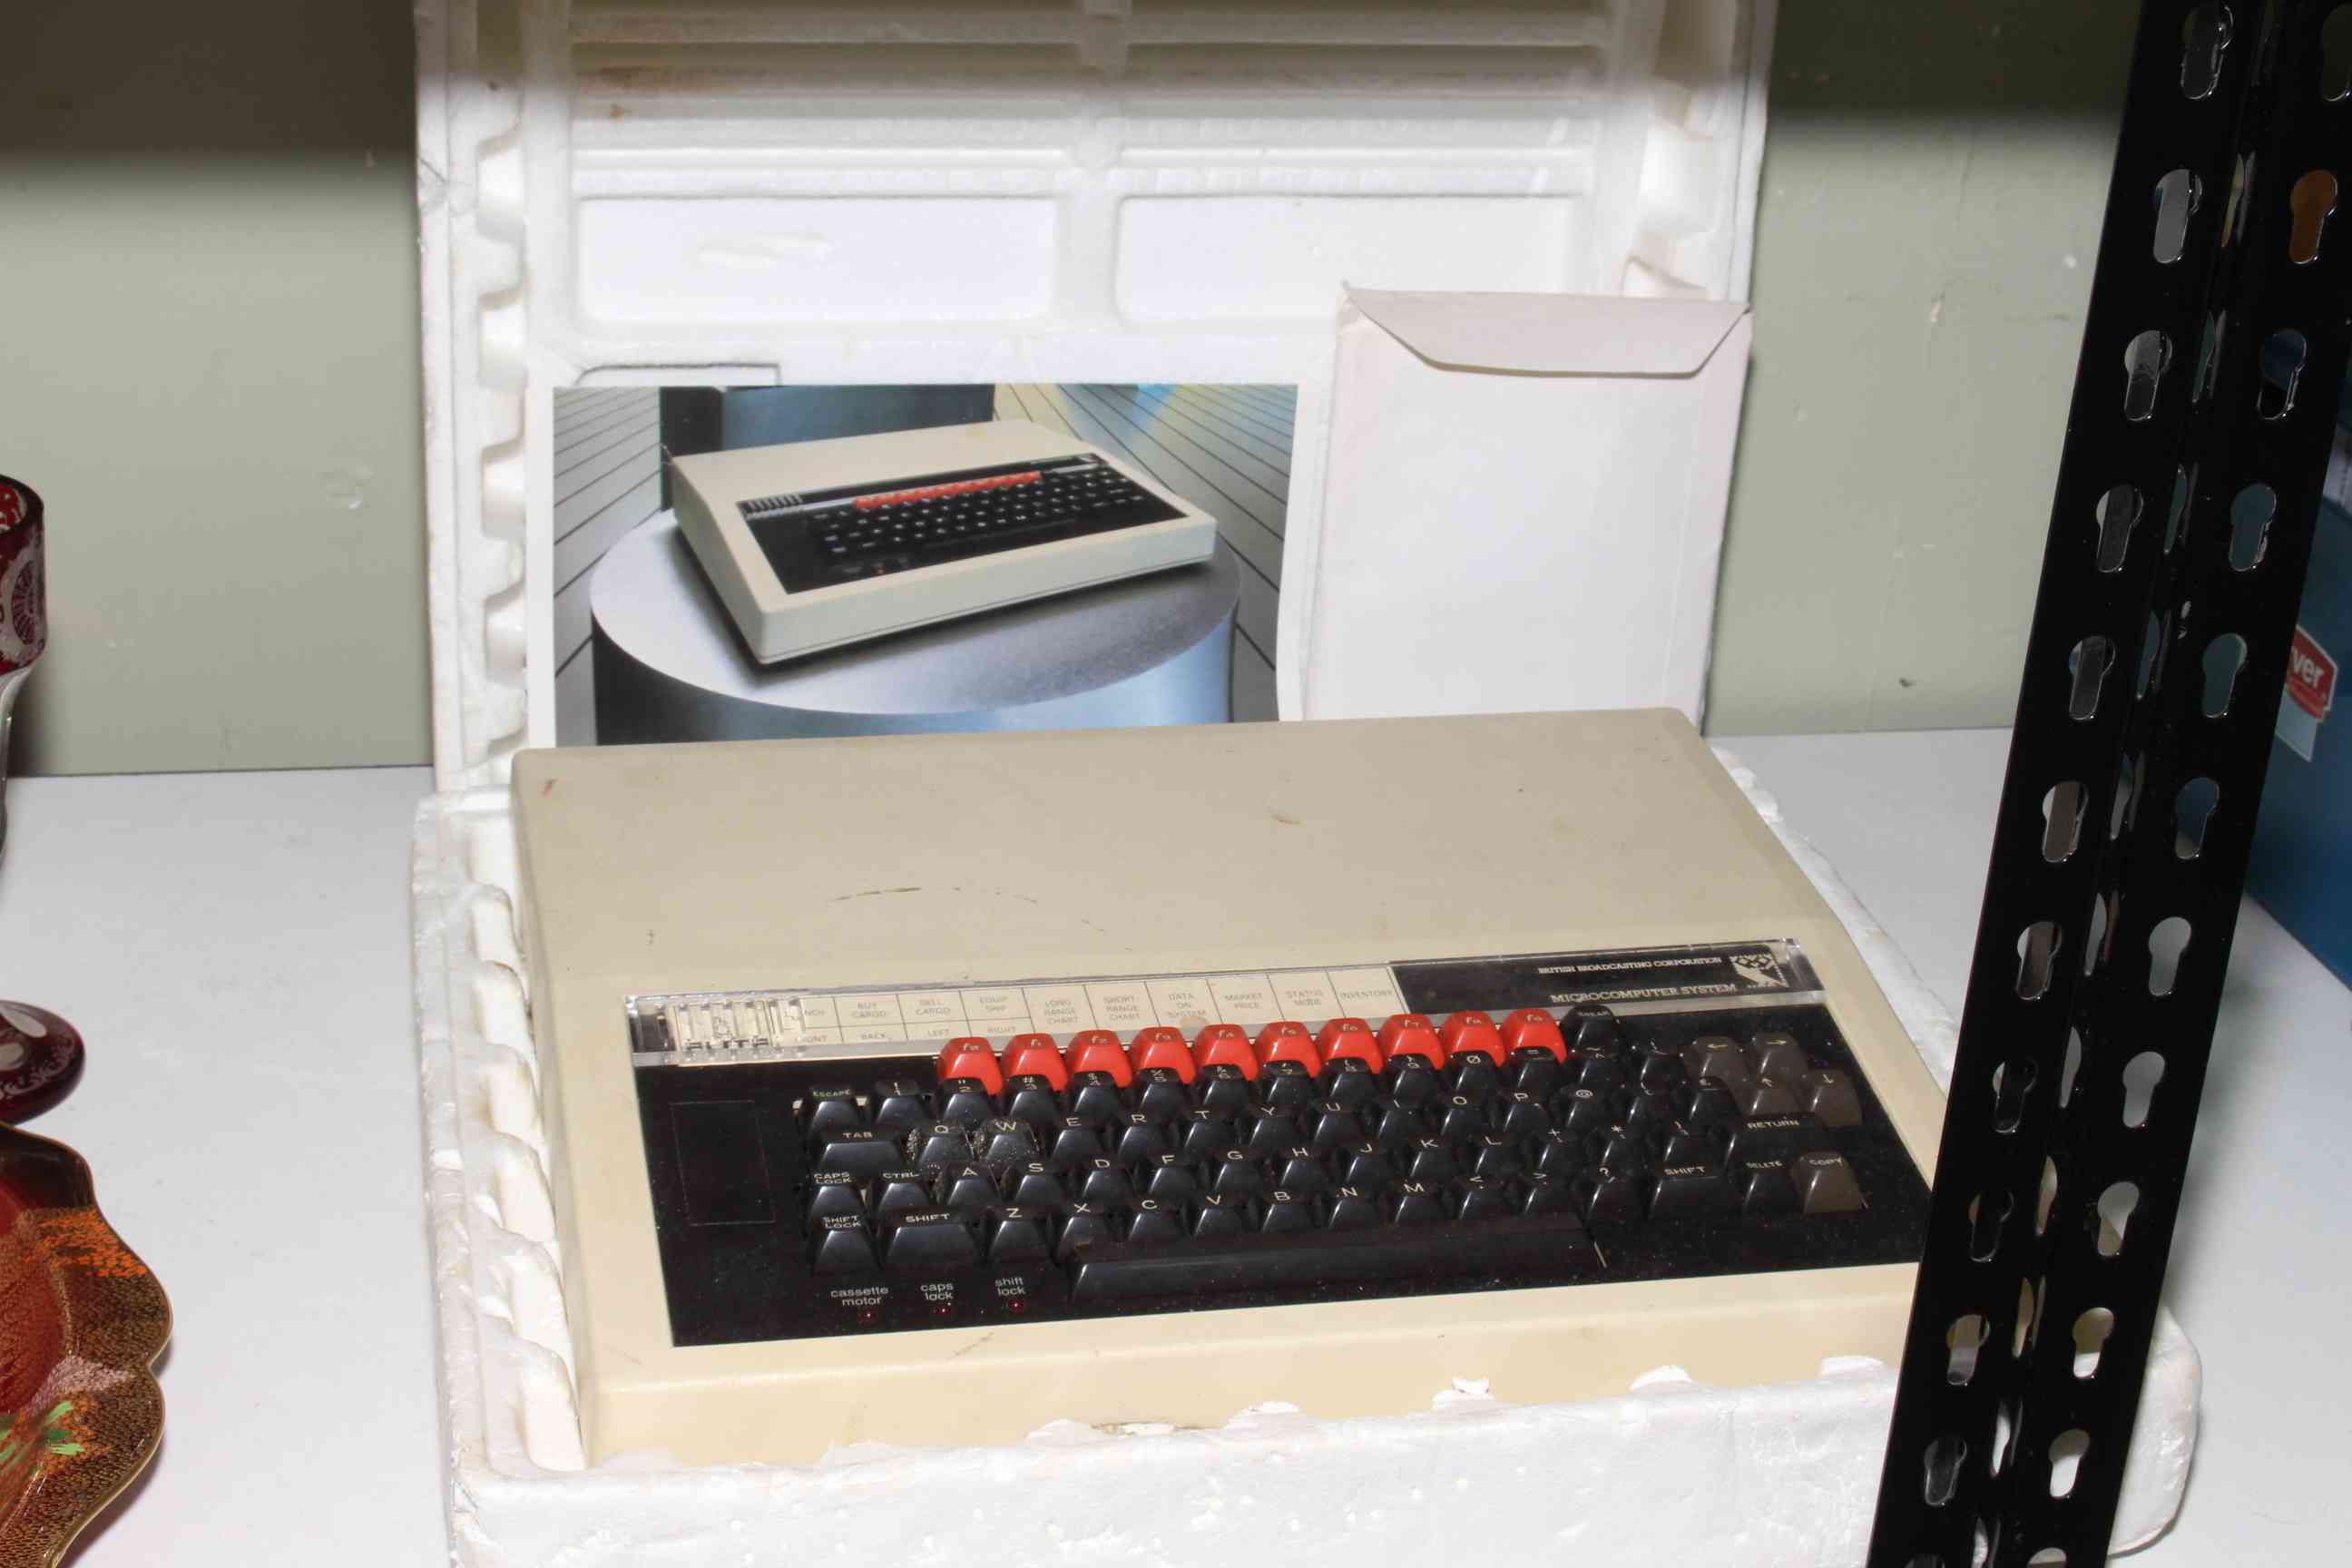 BBC Microcomputer system with paperwork, dated 1984.